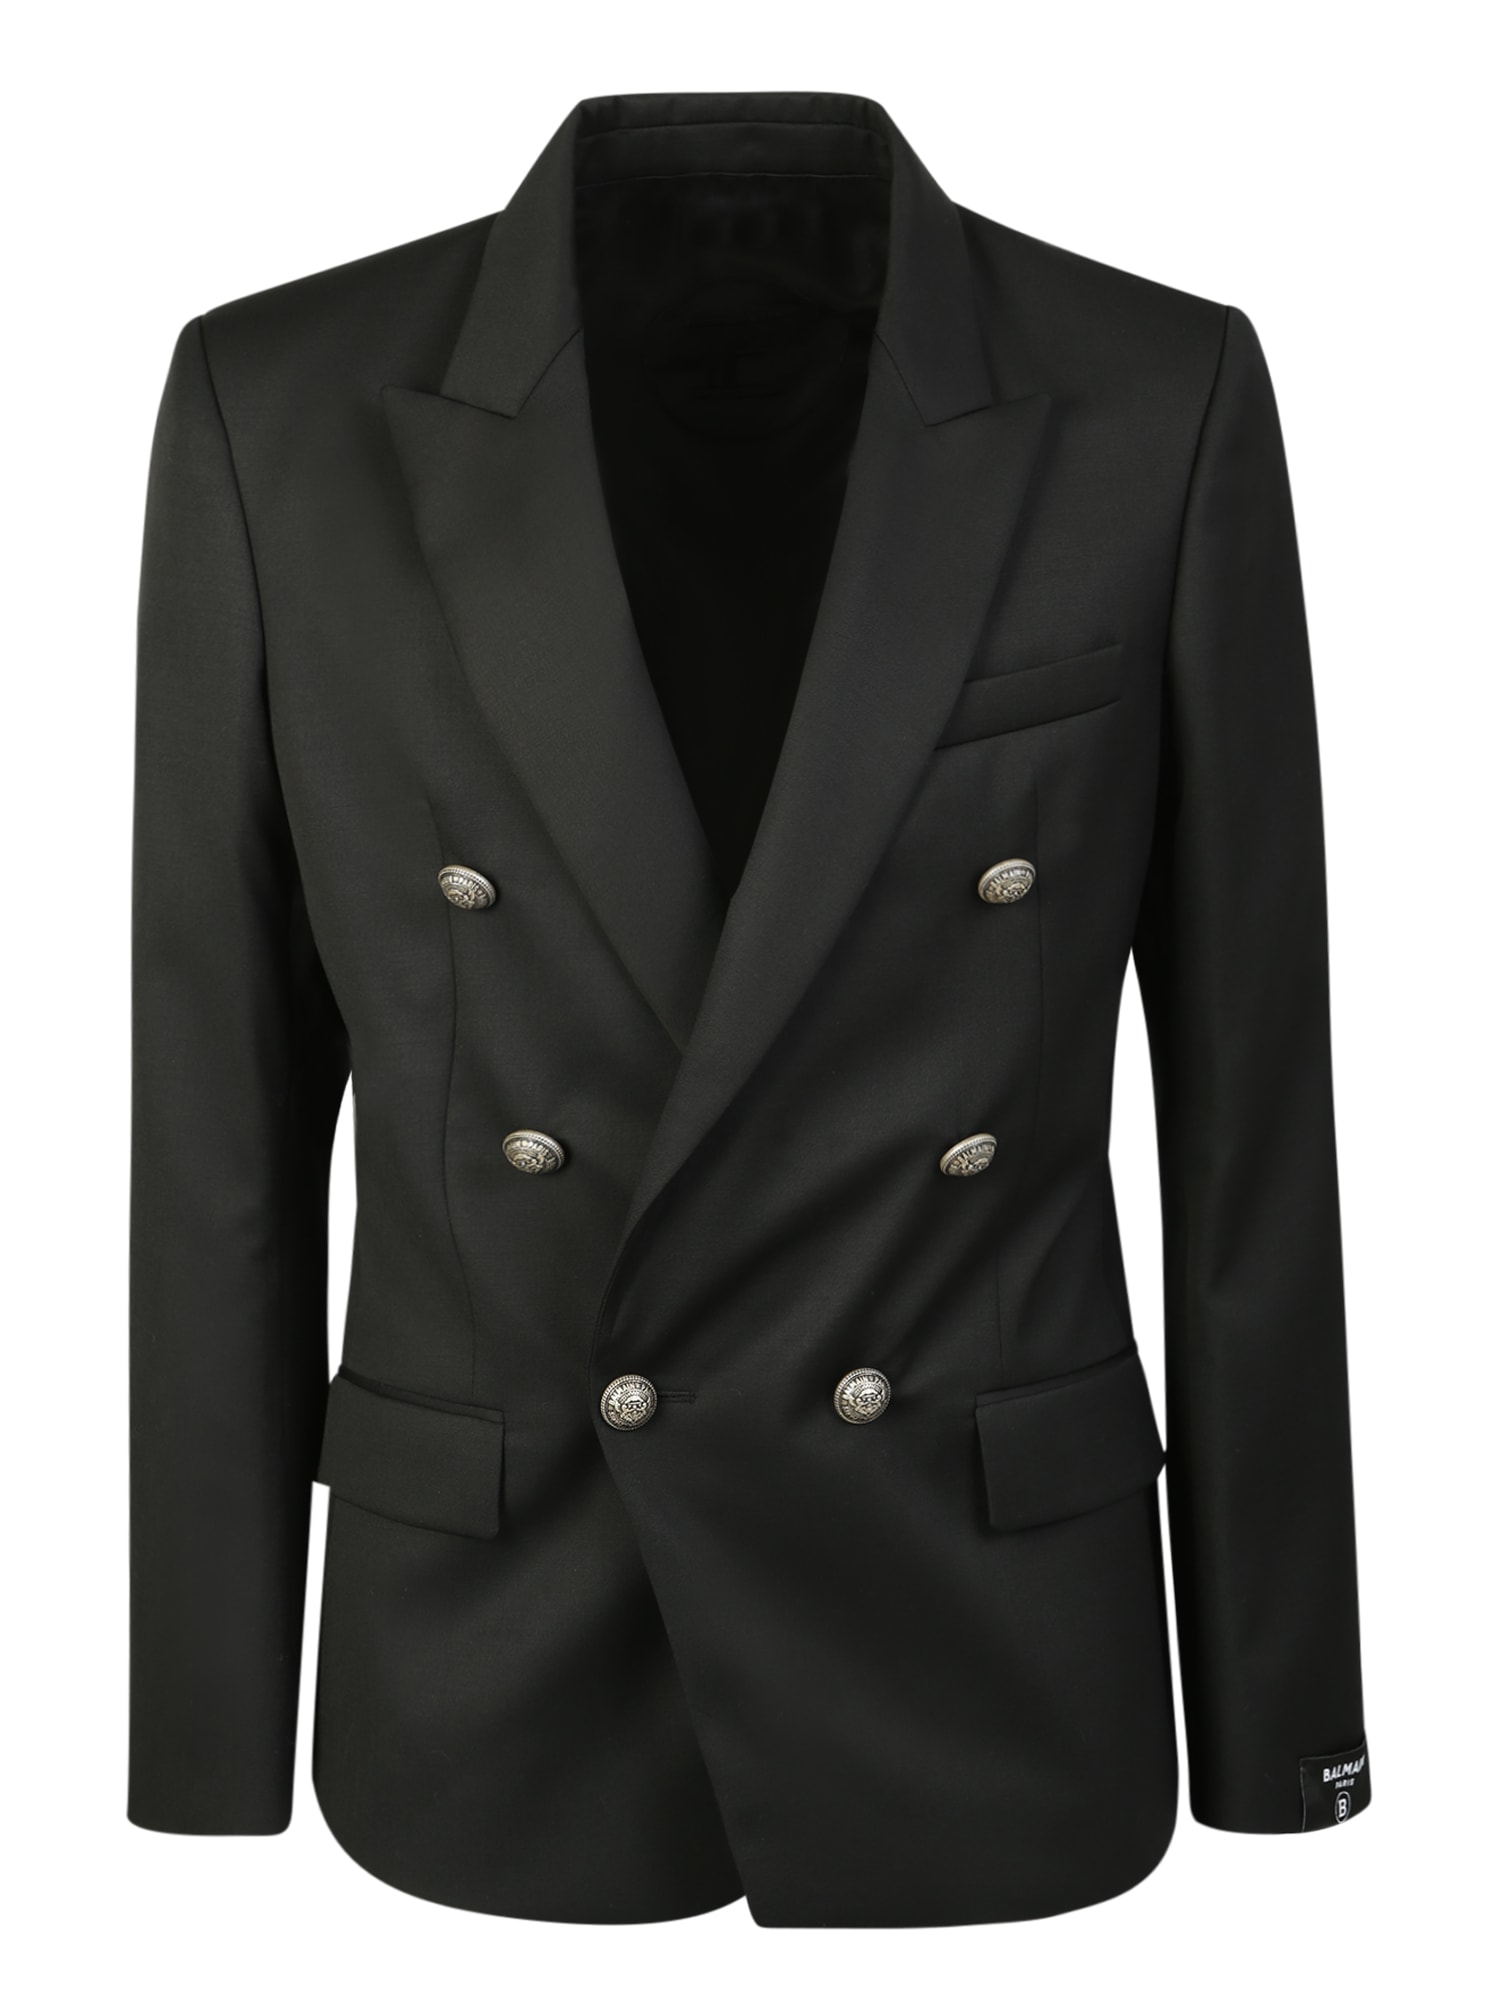 Balmain Tailored Double-breasted Blazer, An Essential Item To Keep Inside The Wardrobe